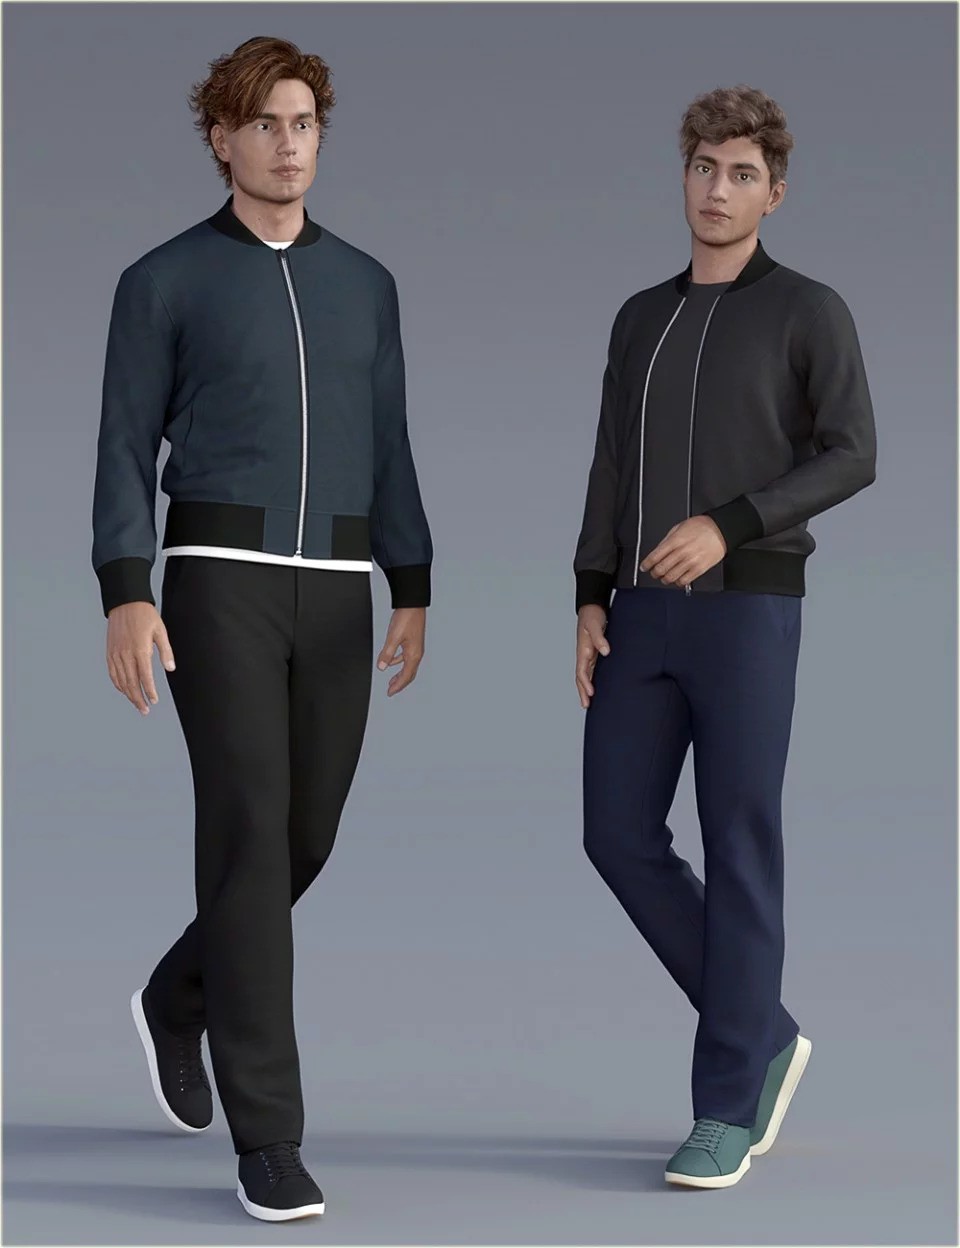 h&c-dforce-basic-jacket-outfit-for-genesis-8-male(s)